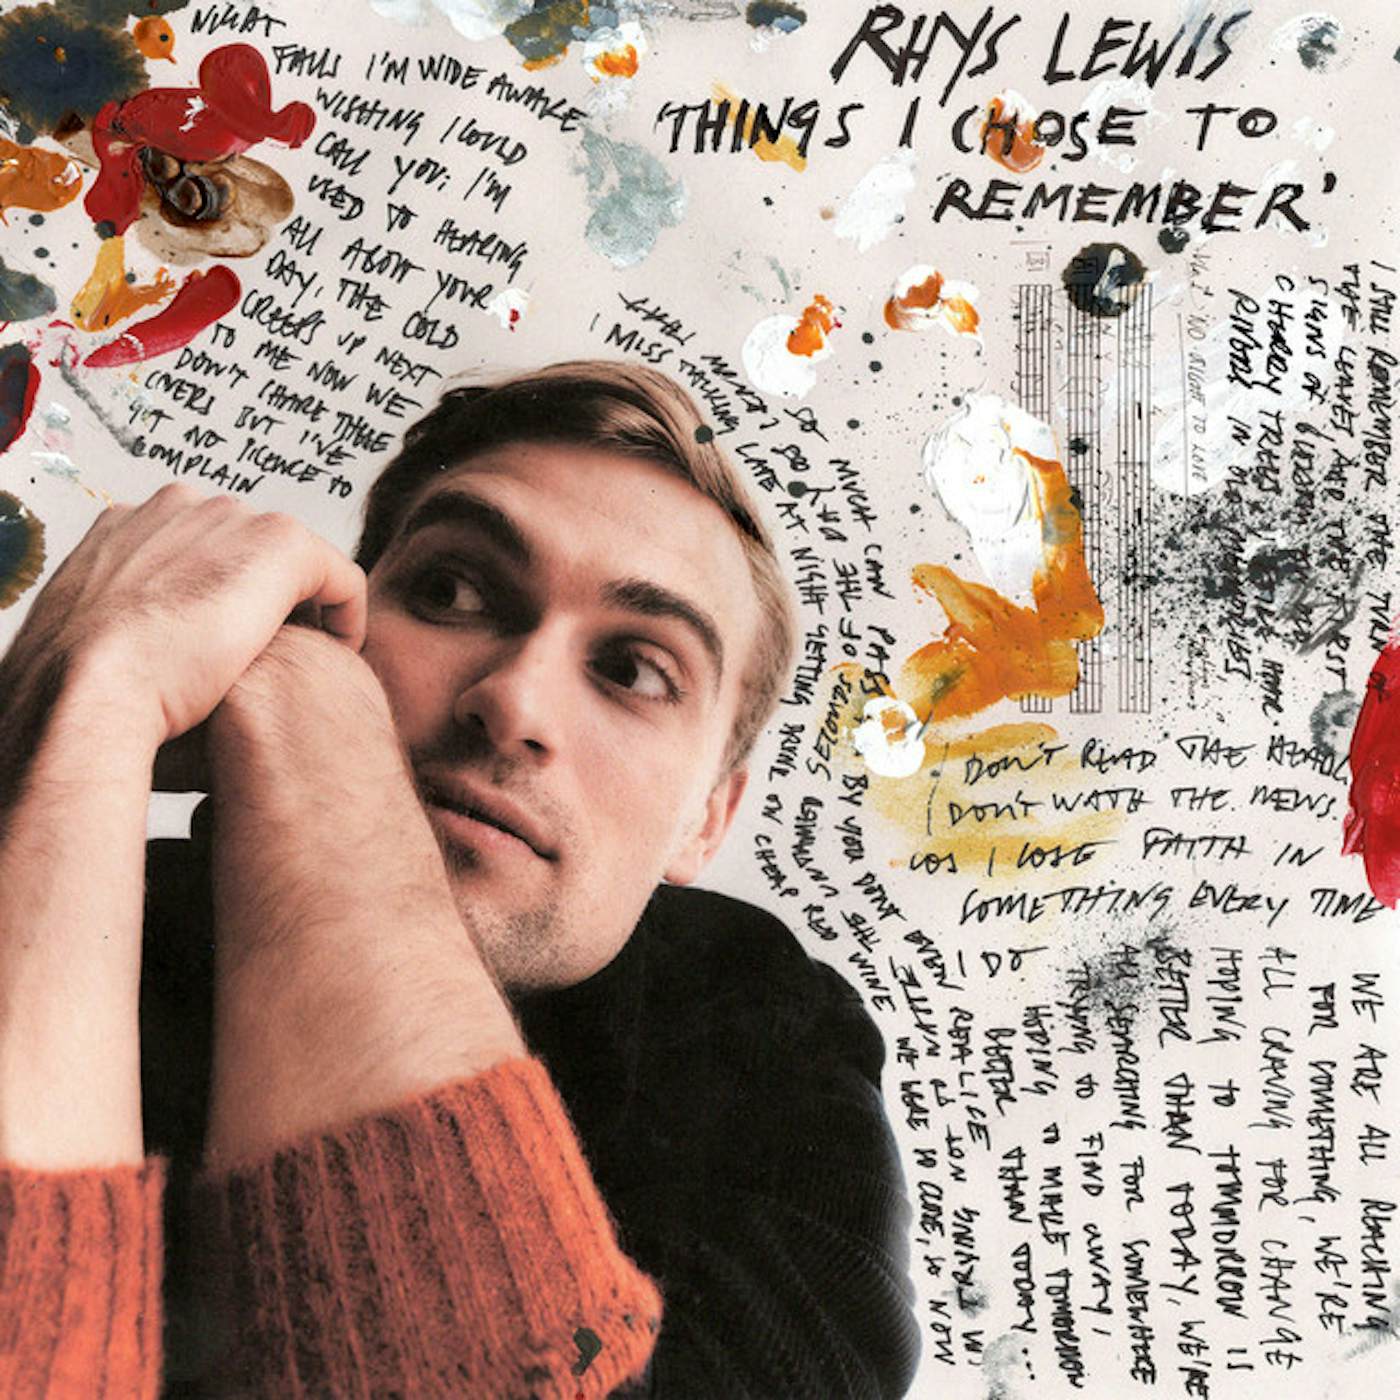 Rhys Lewis THINGS I CHOSE TO REMEMBER CD